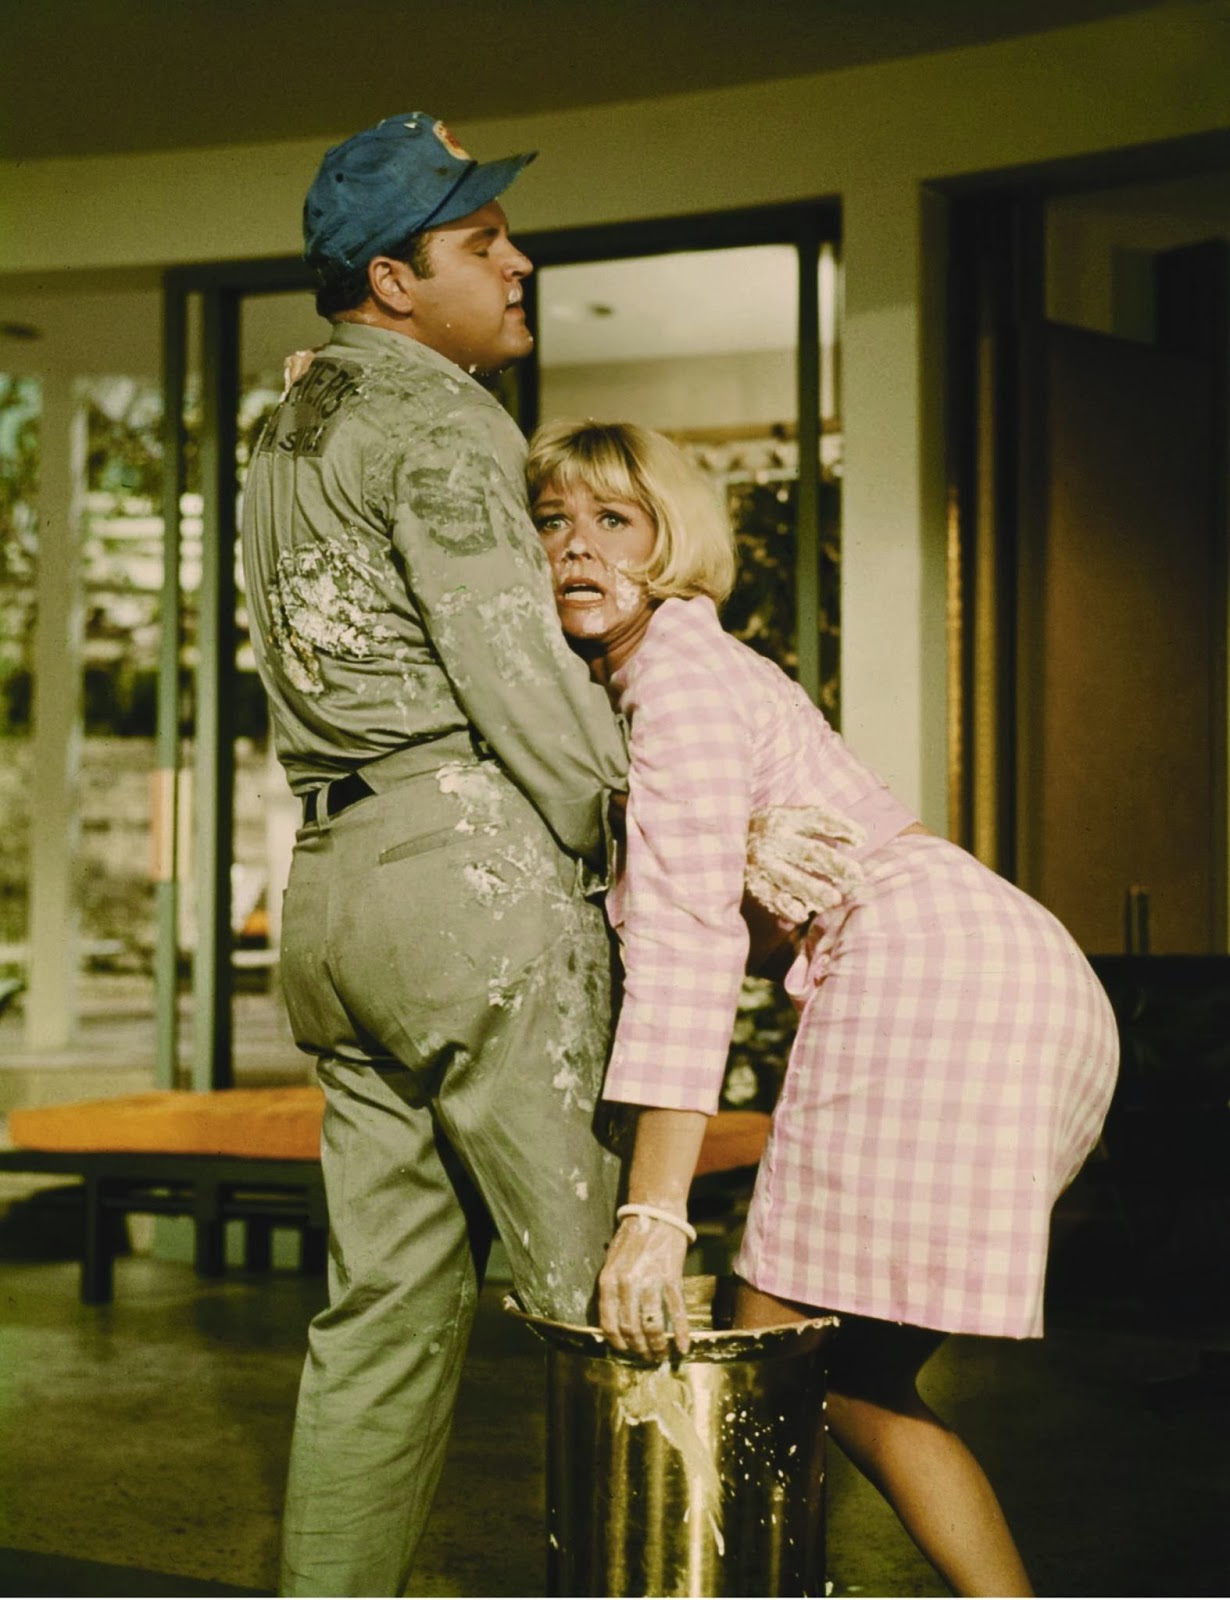 http://4.bp.blogspot.com/-CXHRYh5fJ5E/Utb-aHwA2NI/AAAAAAAAEdg/EGpG_yqG1aY/s1600/still-of-doris-day-in-the-glass-bottom-boat-(1966)-large-picture.jpg